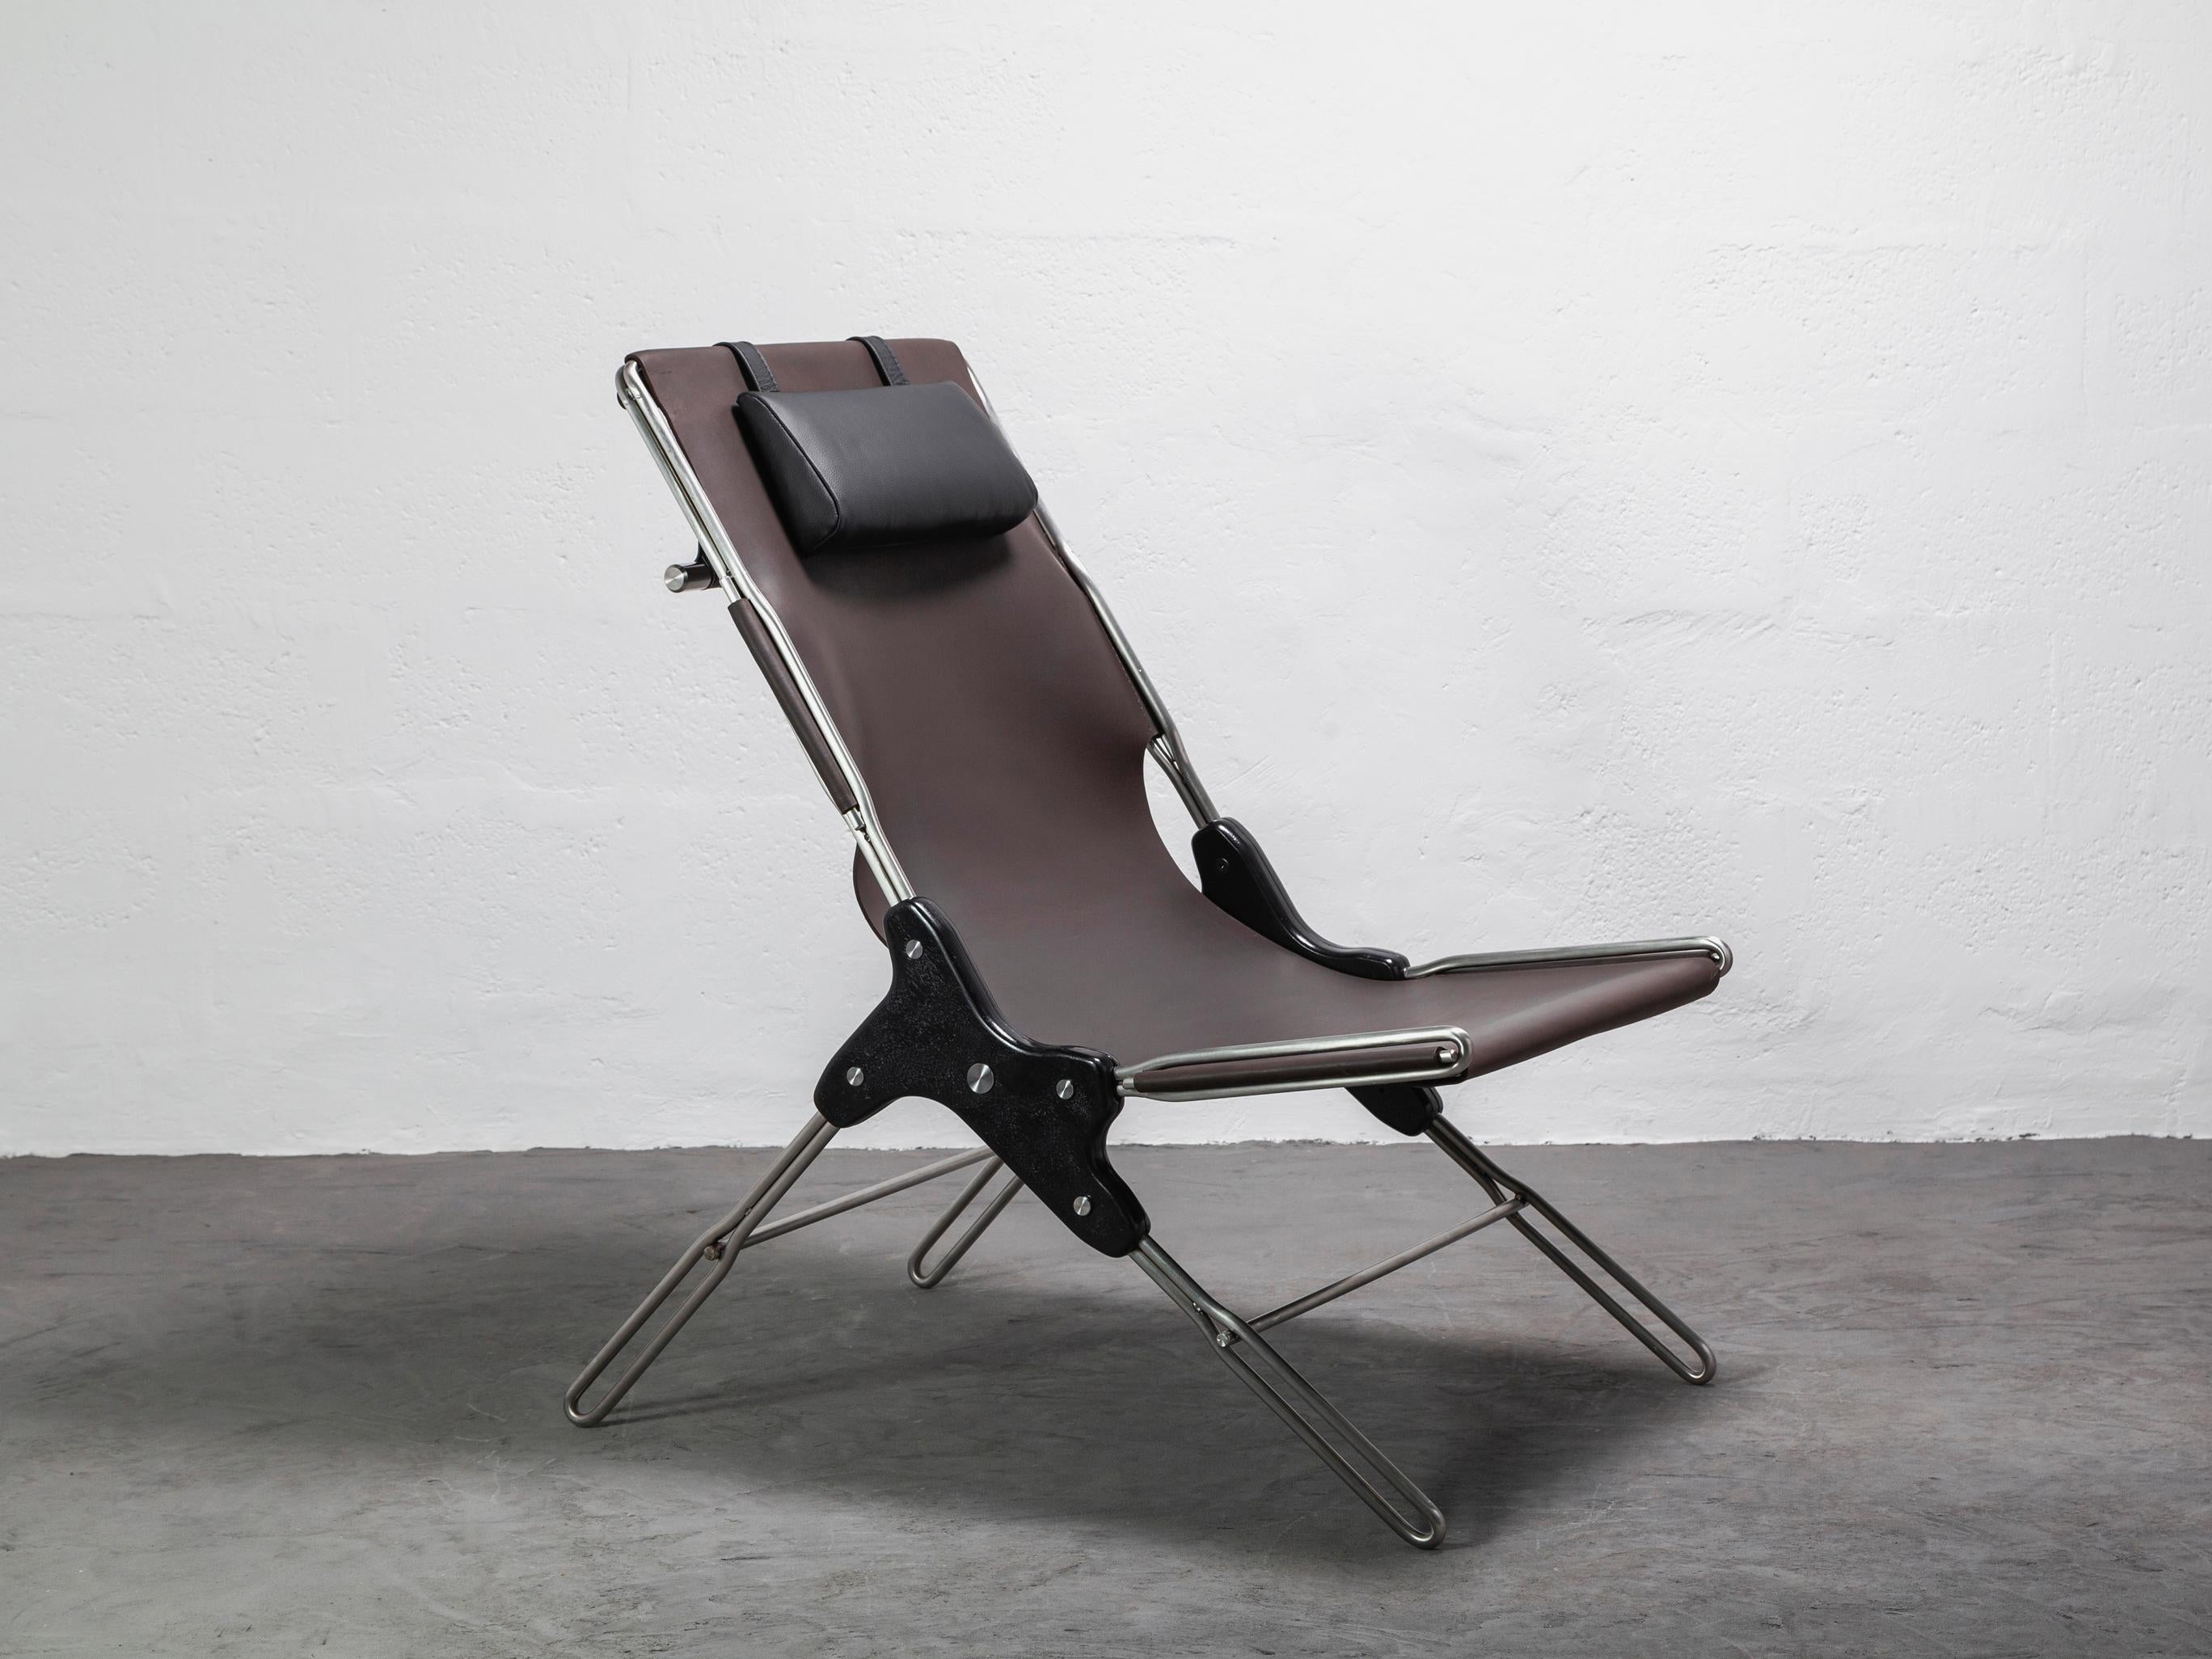 Lounge chair made of stainless steel rod structure and solid colorado wood with a natural oil finish, Ecuadorian cowhide leather seat, and lathed bronze or stainless steel hardware. Available in Olivo, Brown, and Cognac thick leather options.

The